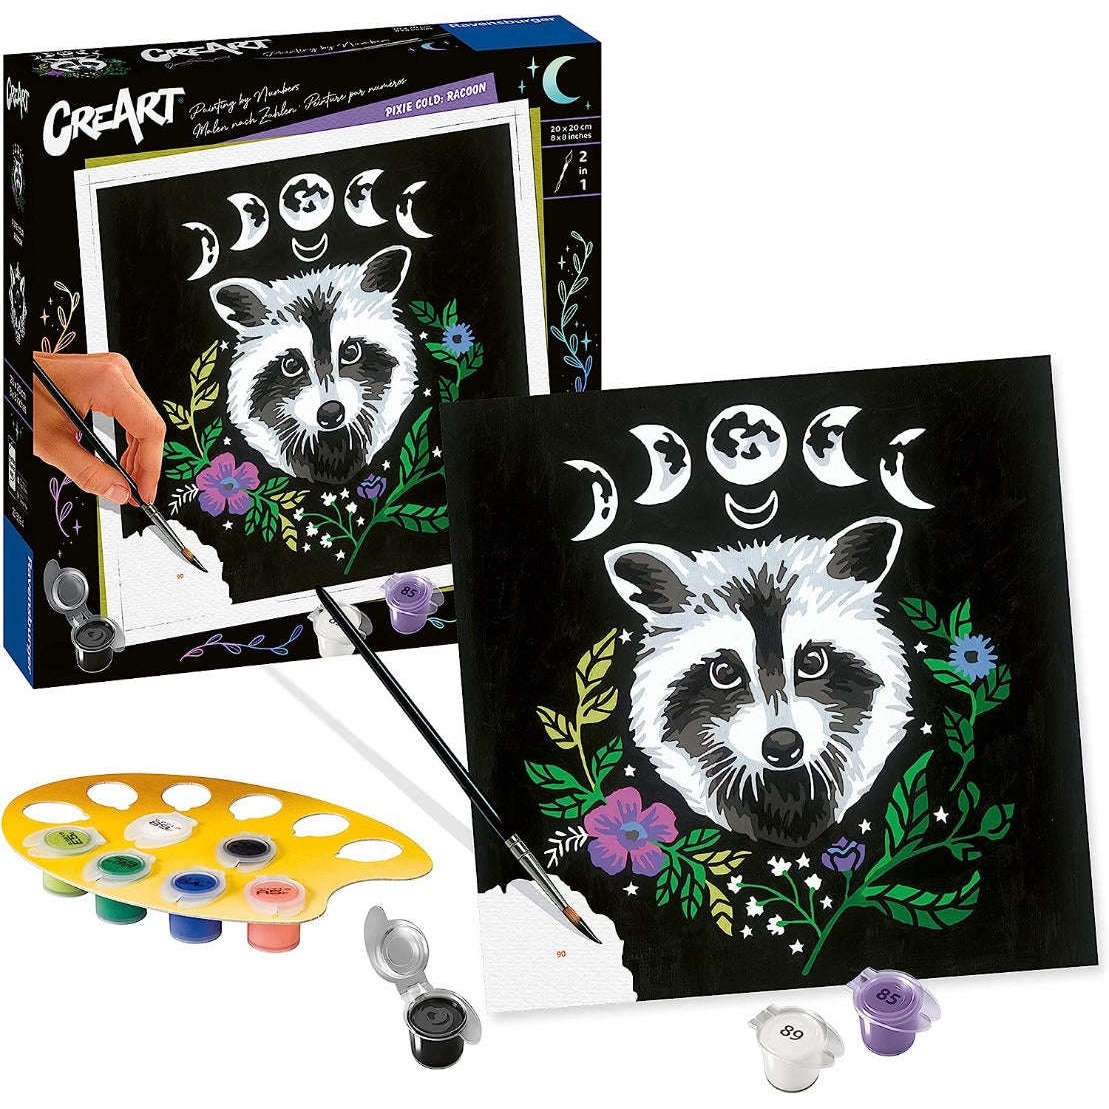 Toys N Tuck:CreArt - Paint By Numbers - Pixie Cold: Racoon,Ravensburger CreArt